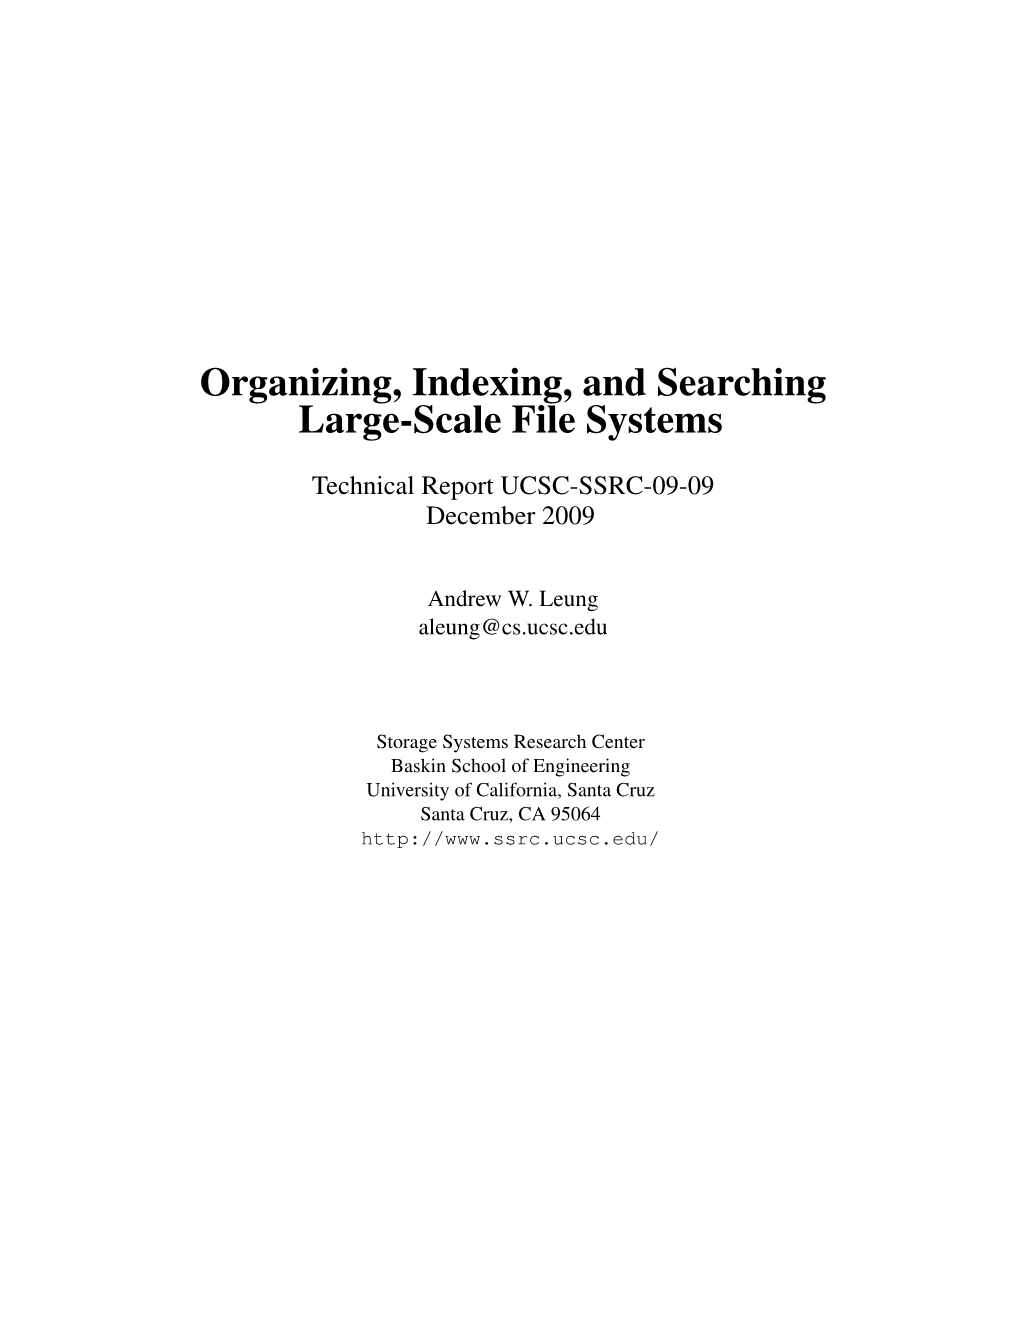 Organizing, Indexing, and Searching Large-Scale File Systems